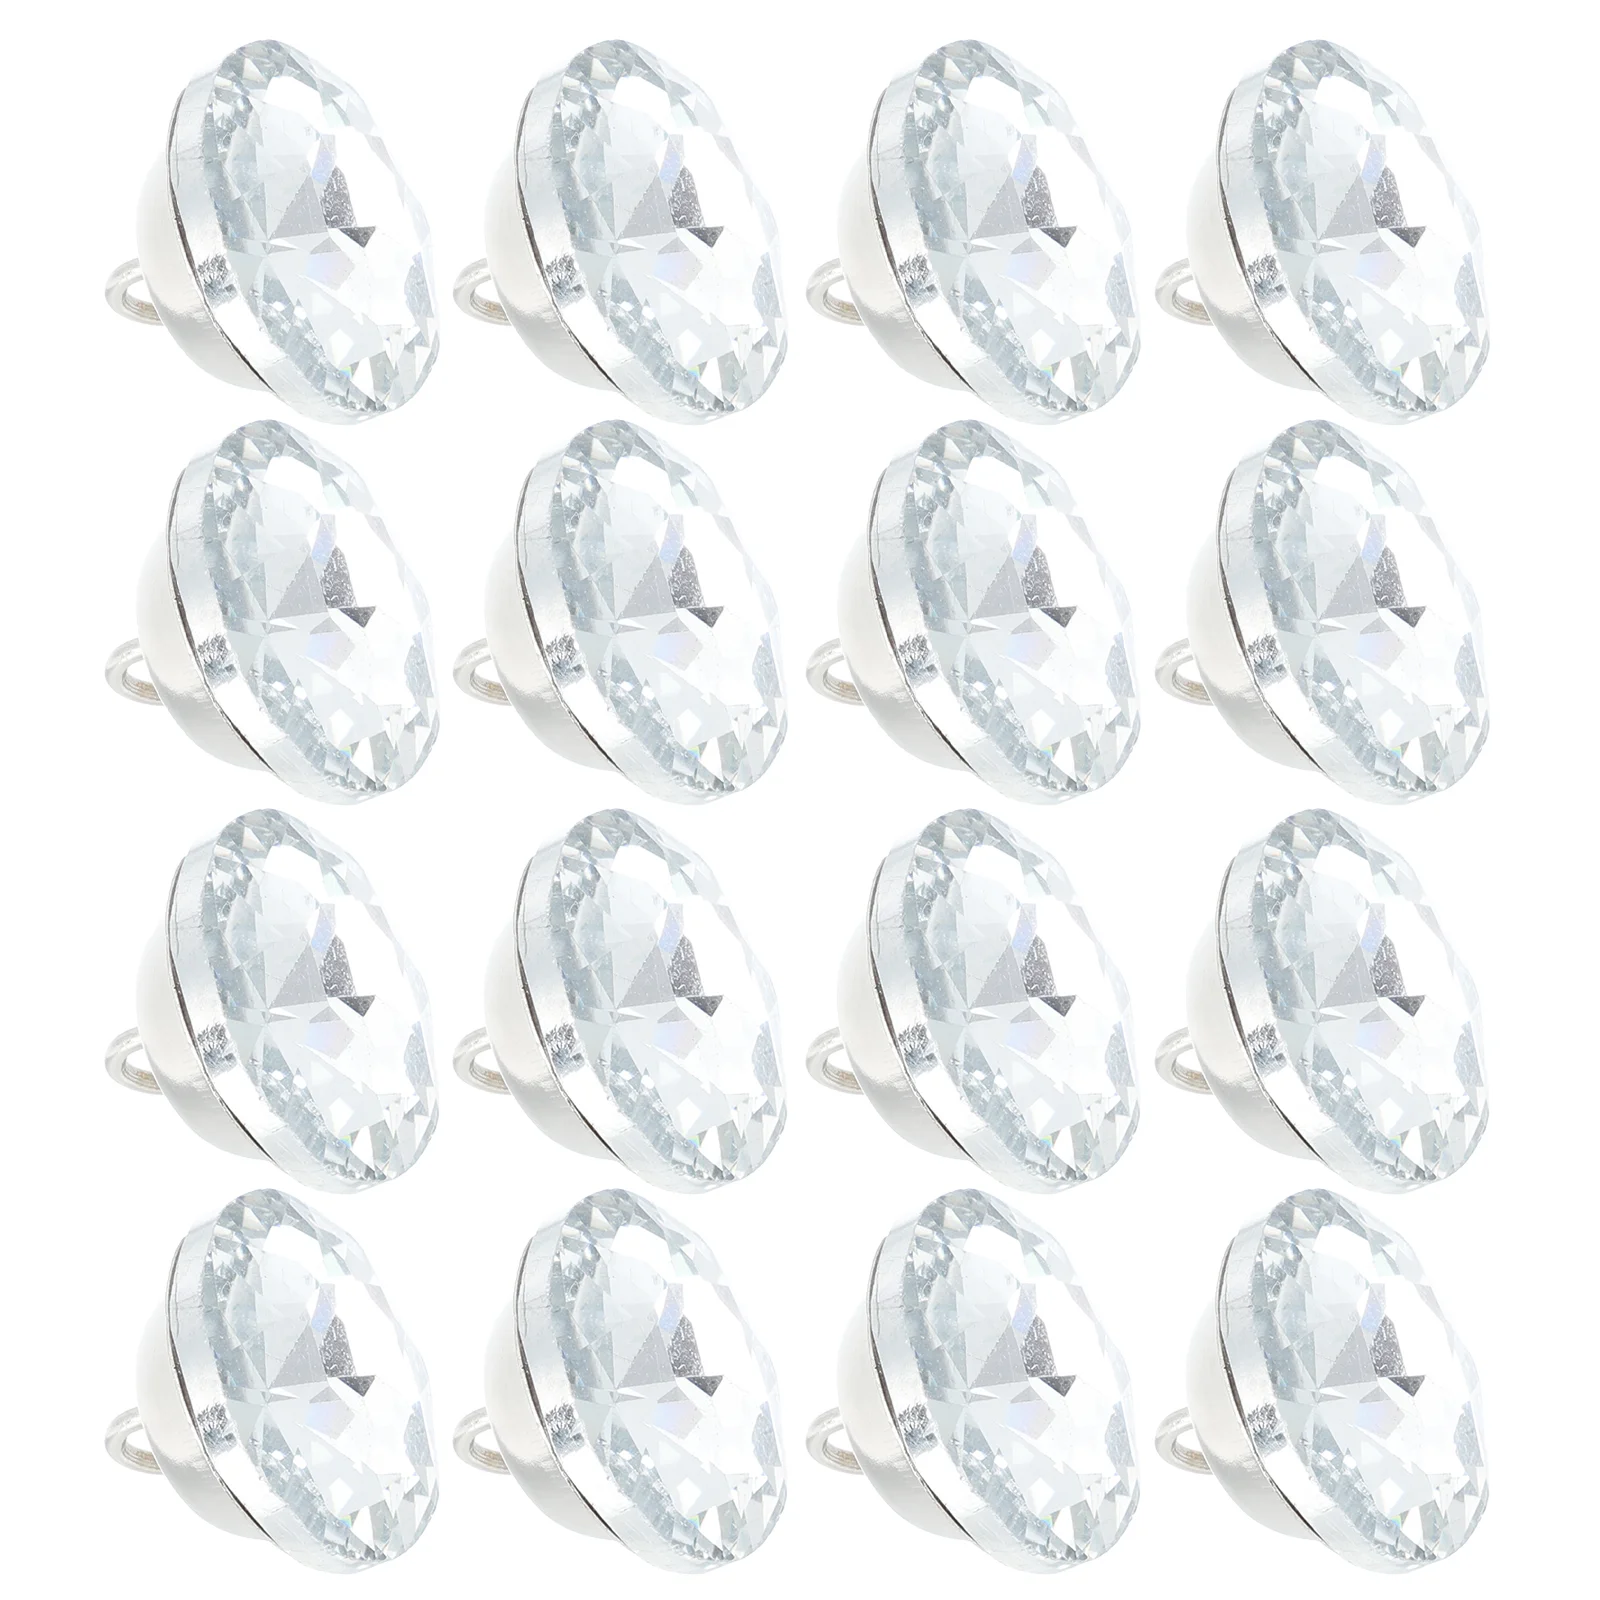 

30pcs Clear Sofa Upholstery Nails Diamante Buttons for Upholstery Sofa Bed Headboard Button Rhinestone Crystal Buttons